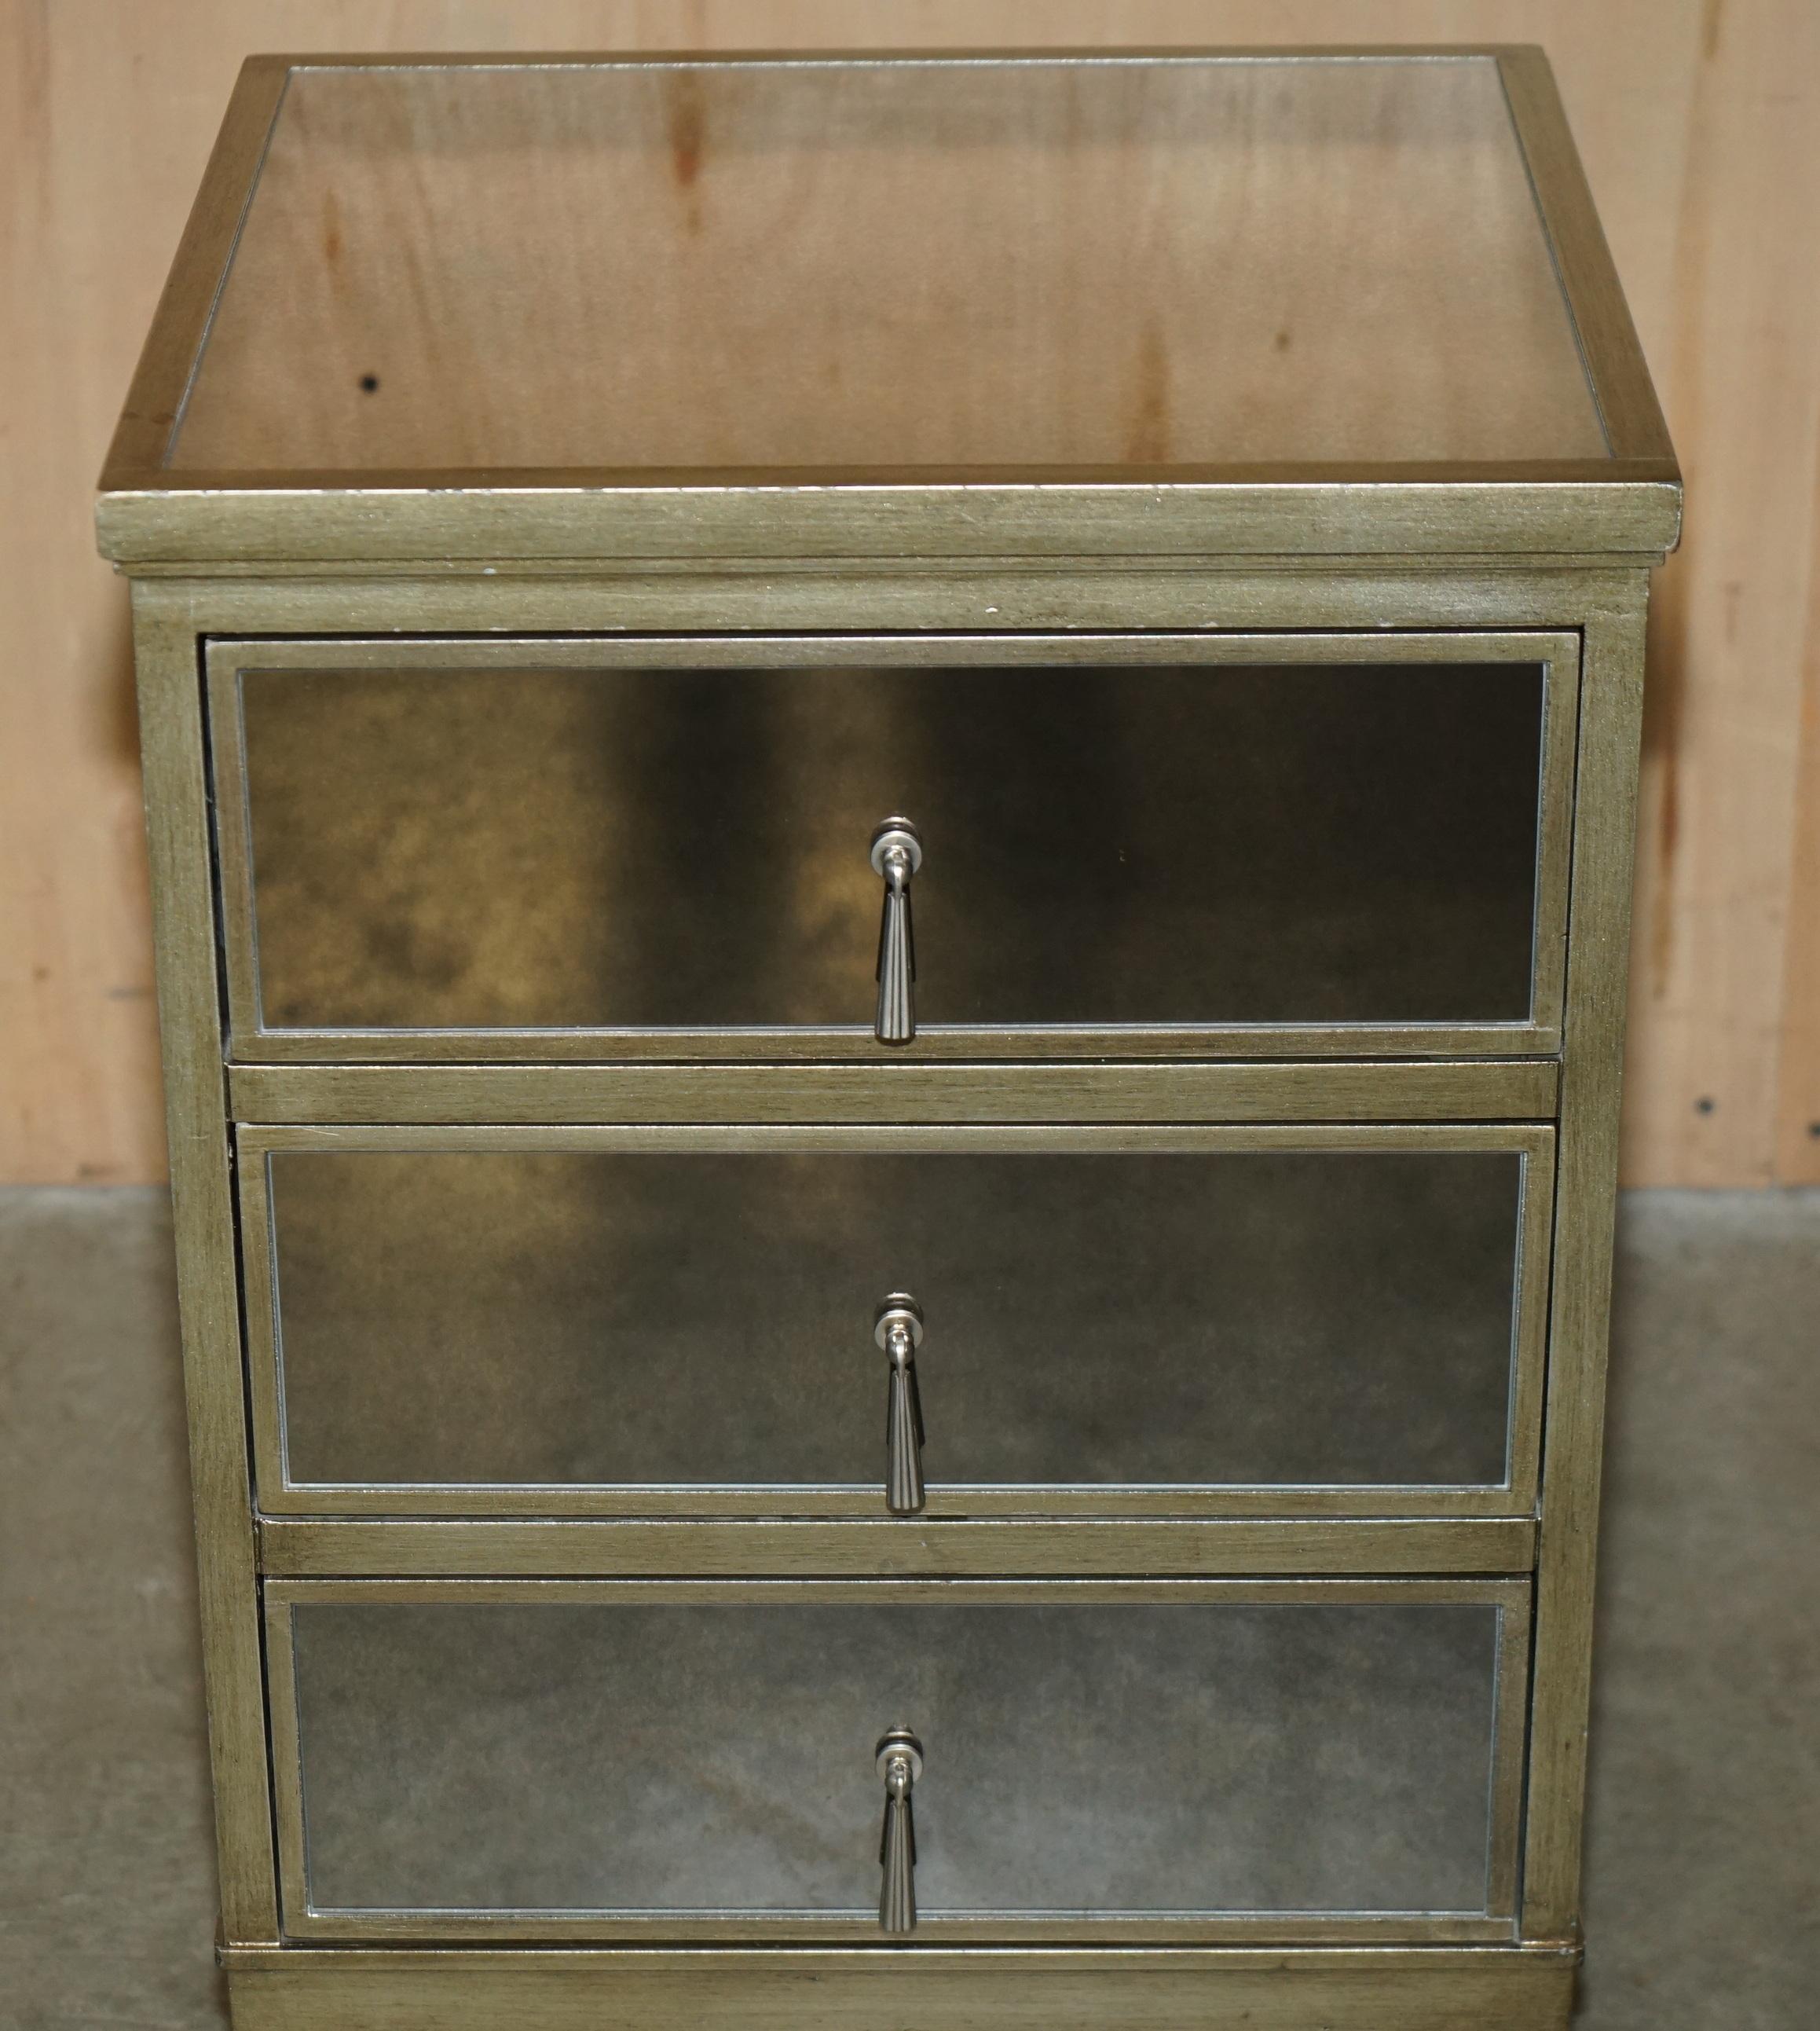 20th Century PAIR OF FEATHER & BLACK GATSBY MiRRORED BEDSIDE TABLES MATCHING DRAWERS AVAILABL